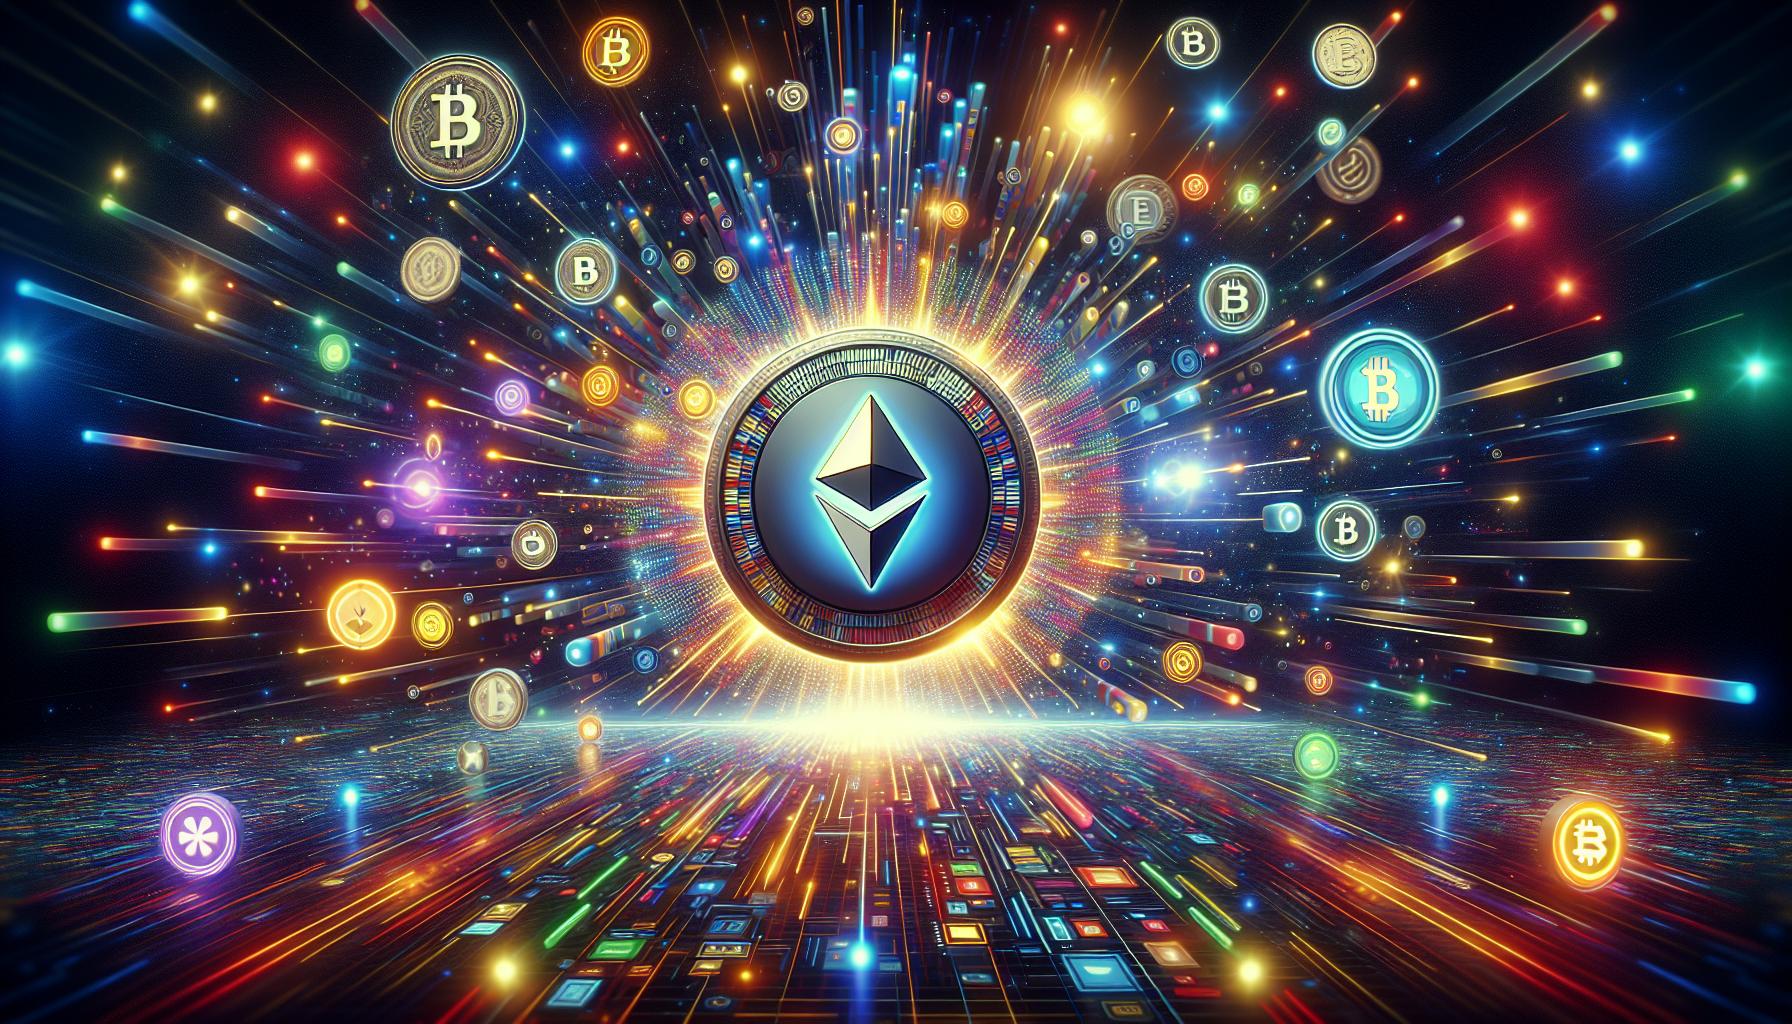 Telegram trading bot Unibot gains traction on Solana after Ethereum triumph | FinOracle